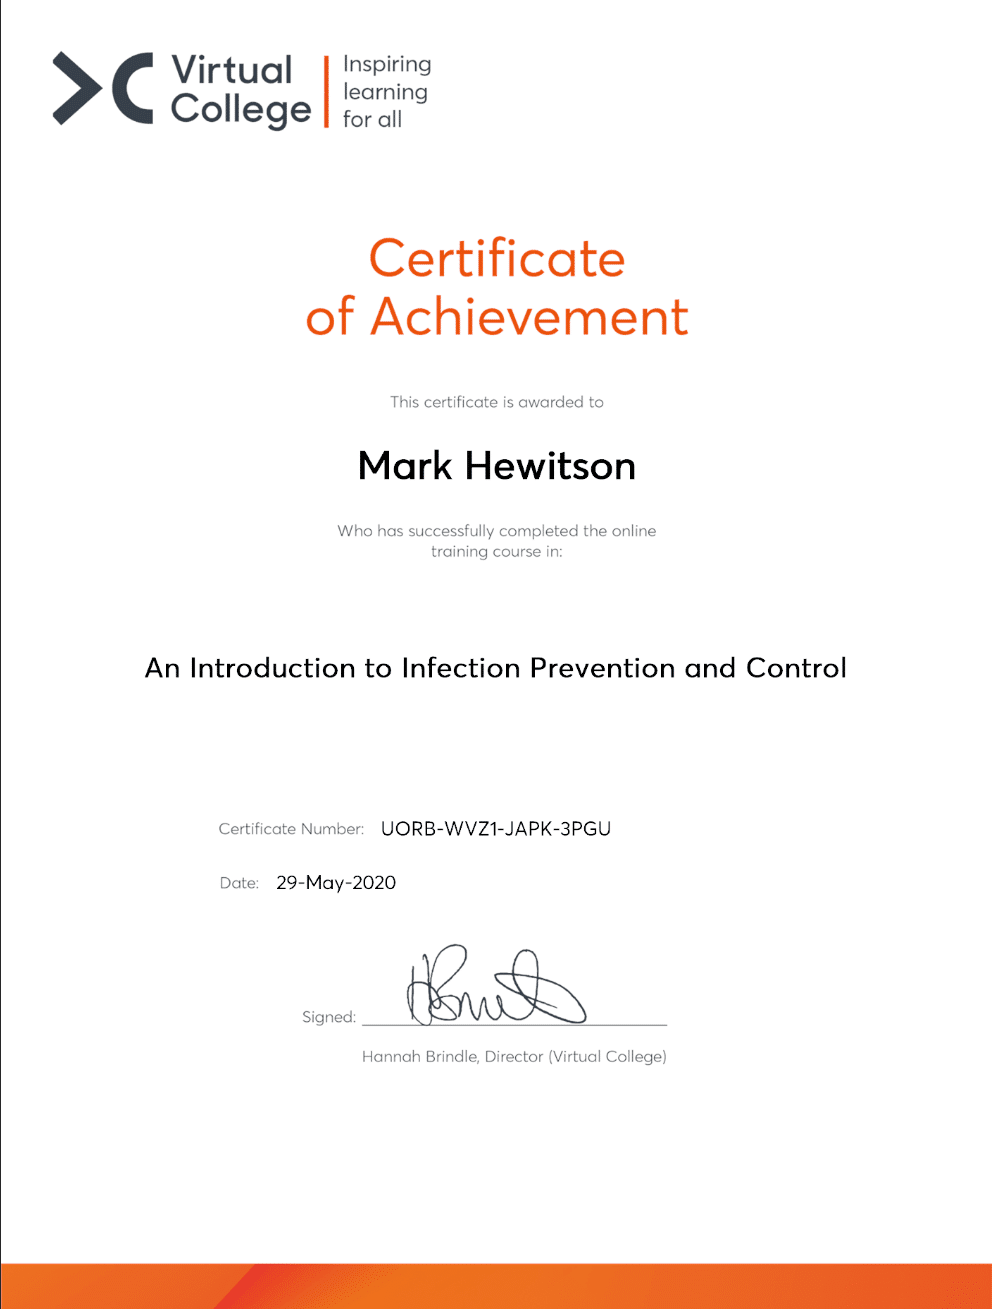 Mark Hewitson's Certificate of Achievement - An Introduction to Infection Prevention and Control